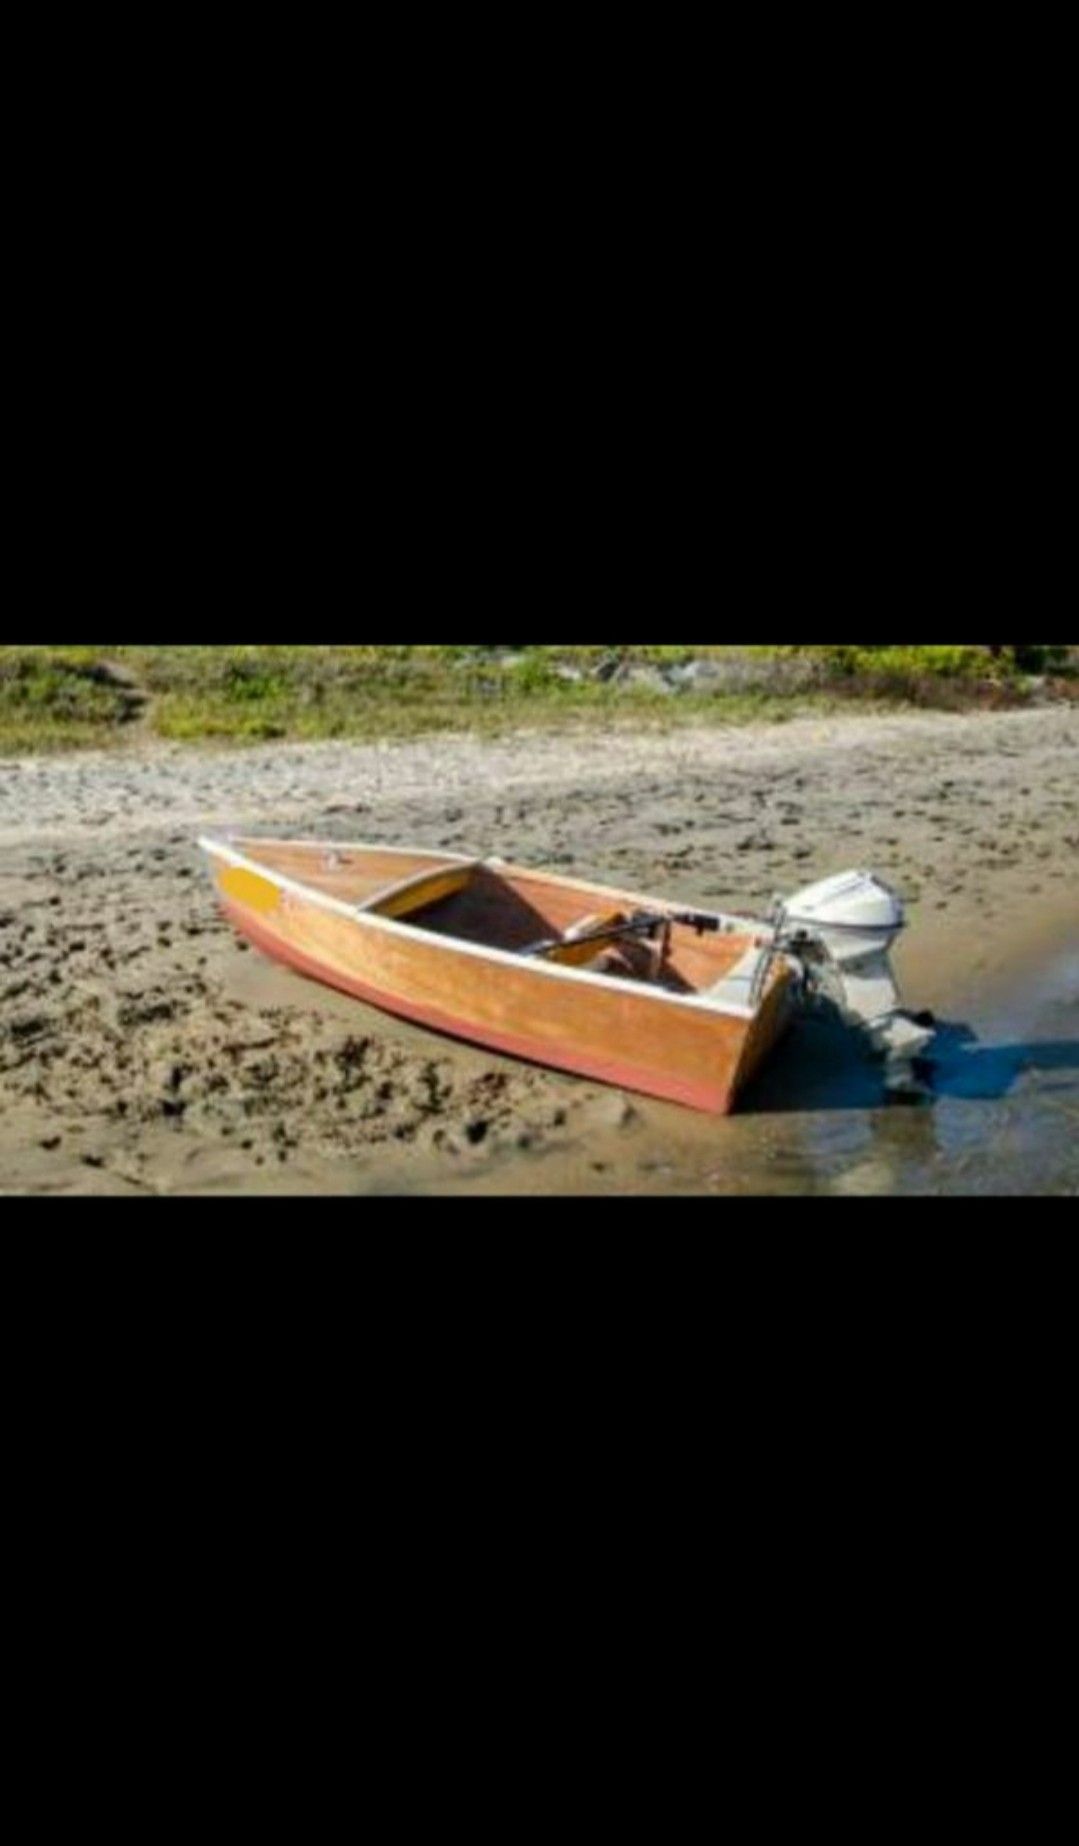 Custom Wooden 8' Mahogany Dinghy for fishing, cruising harbor, or tender for classic boat